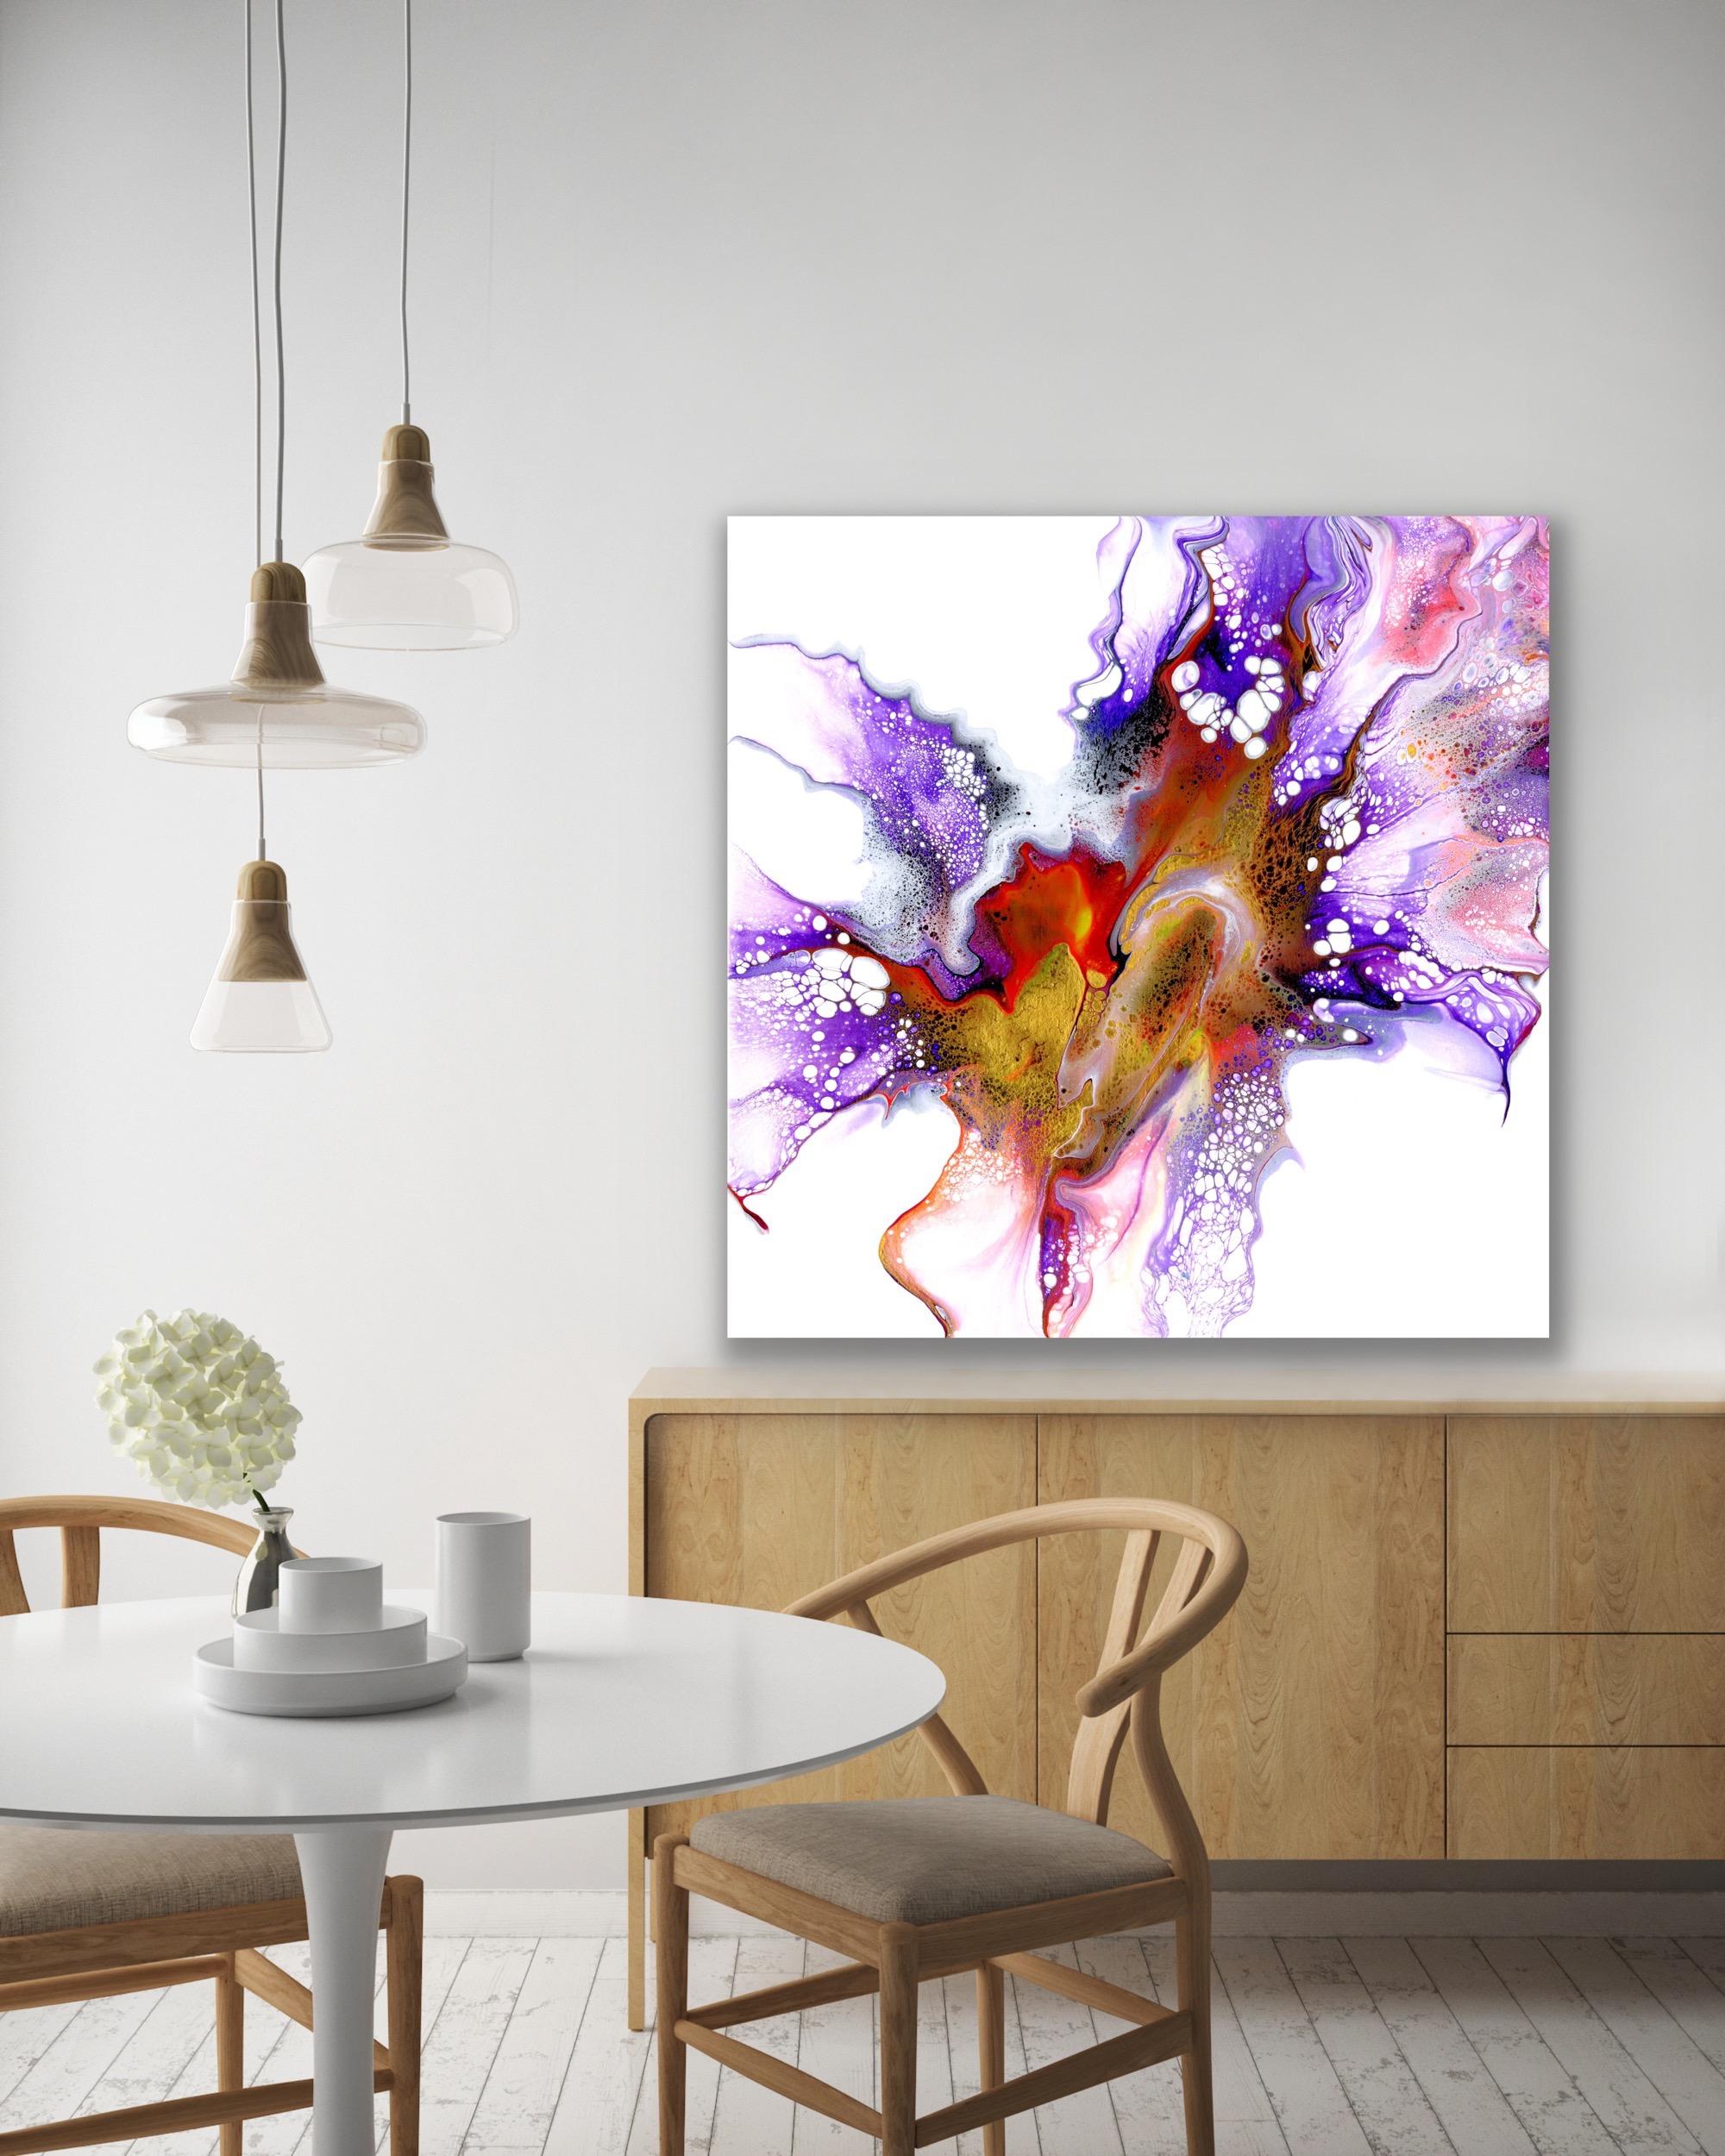 This contemporary modern abstract painting is printed on a lightweight metal composite and comes ready to hang. This vibrant composition can be hung both indoor and outdoor as it is weather resistant.

-Title: Contention
-Artist: Celeste